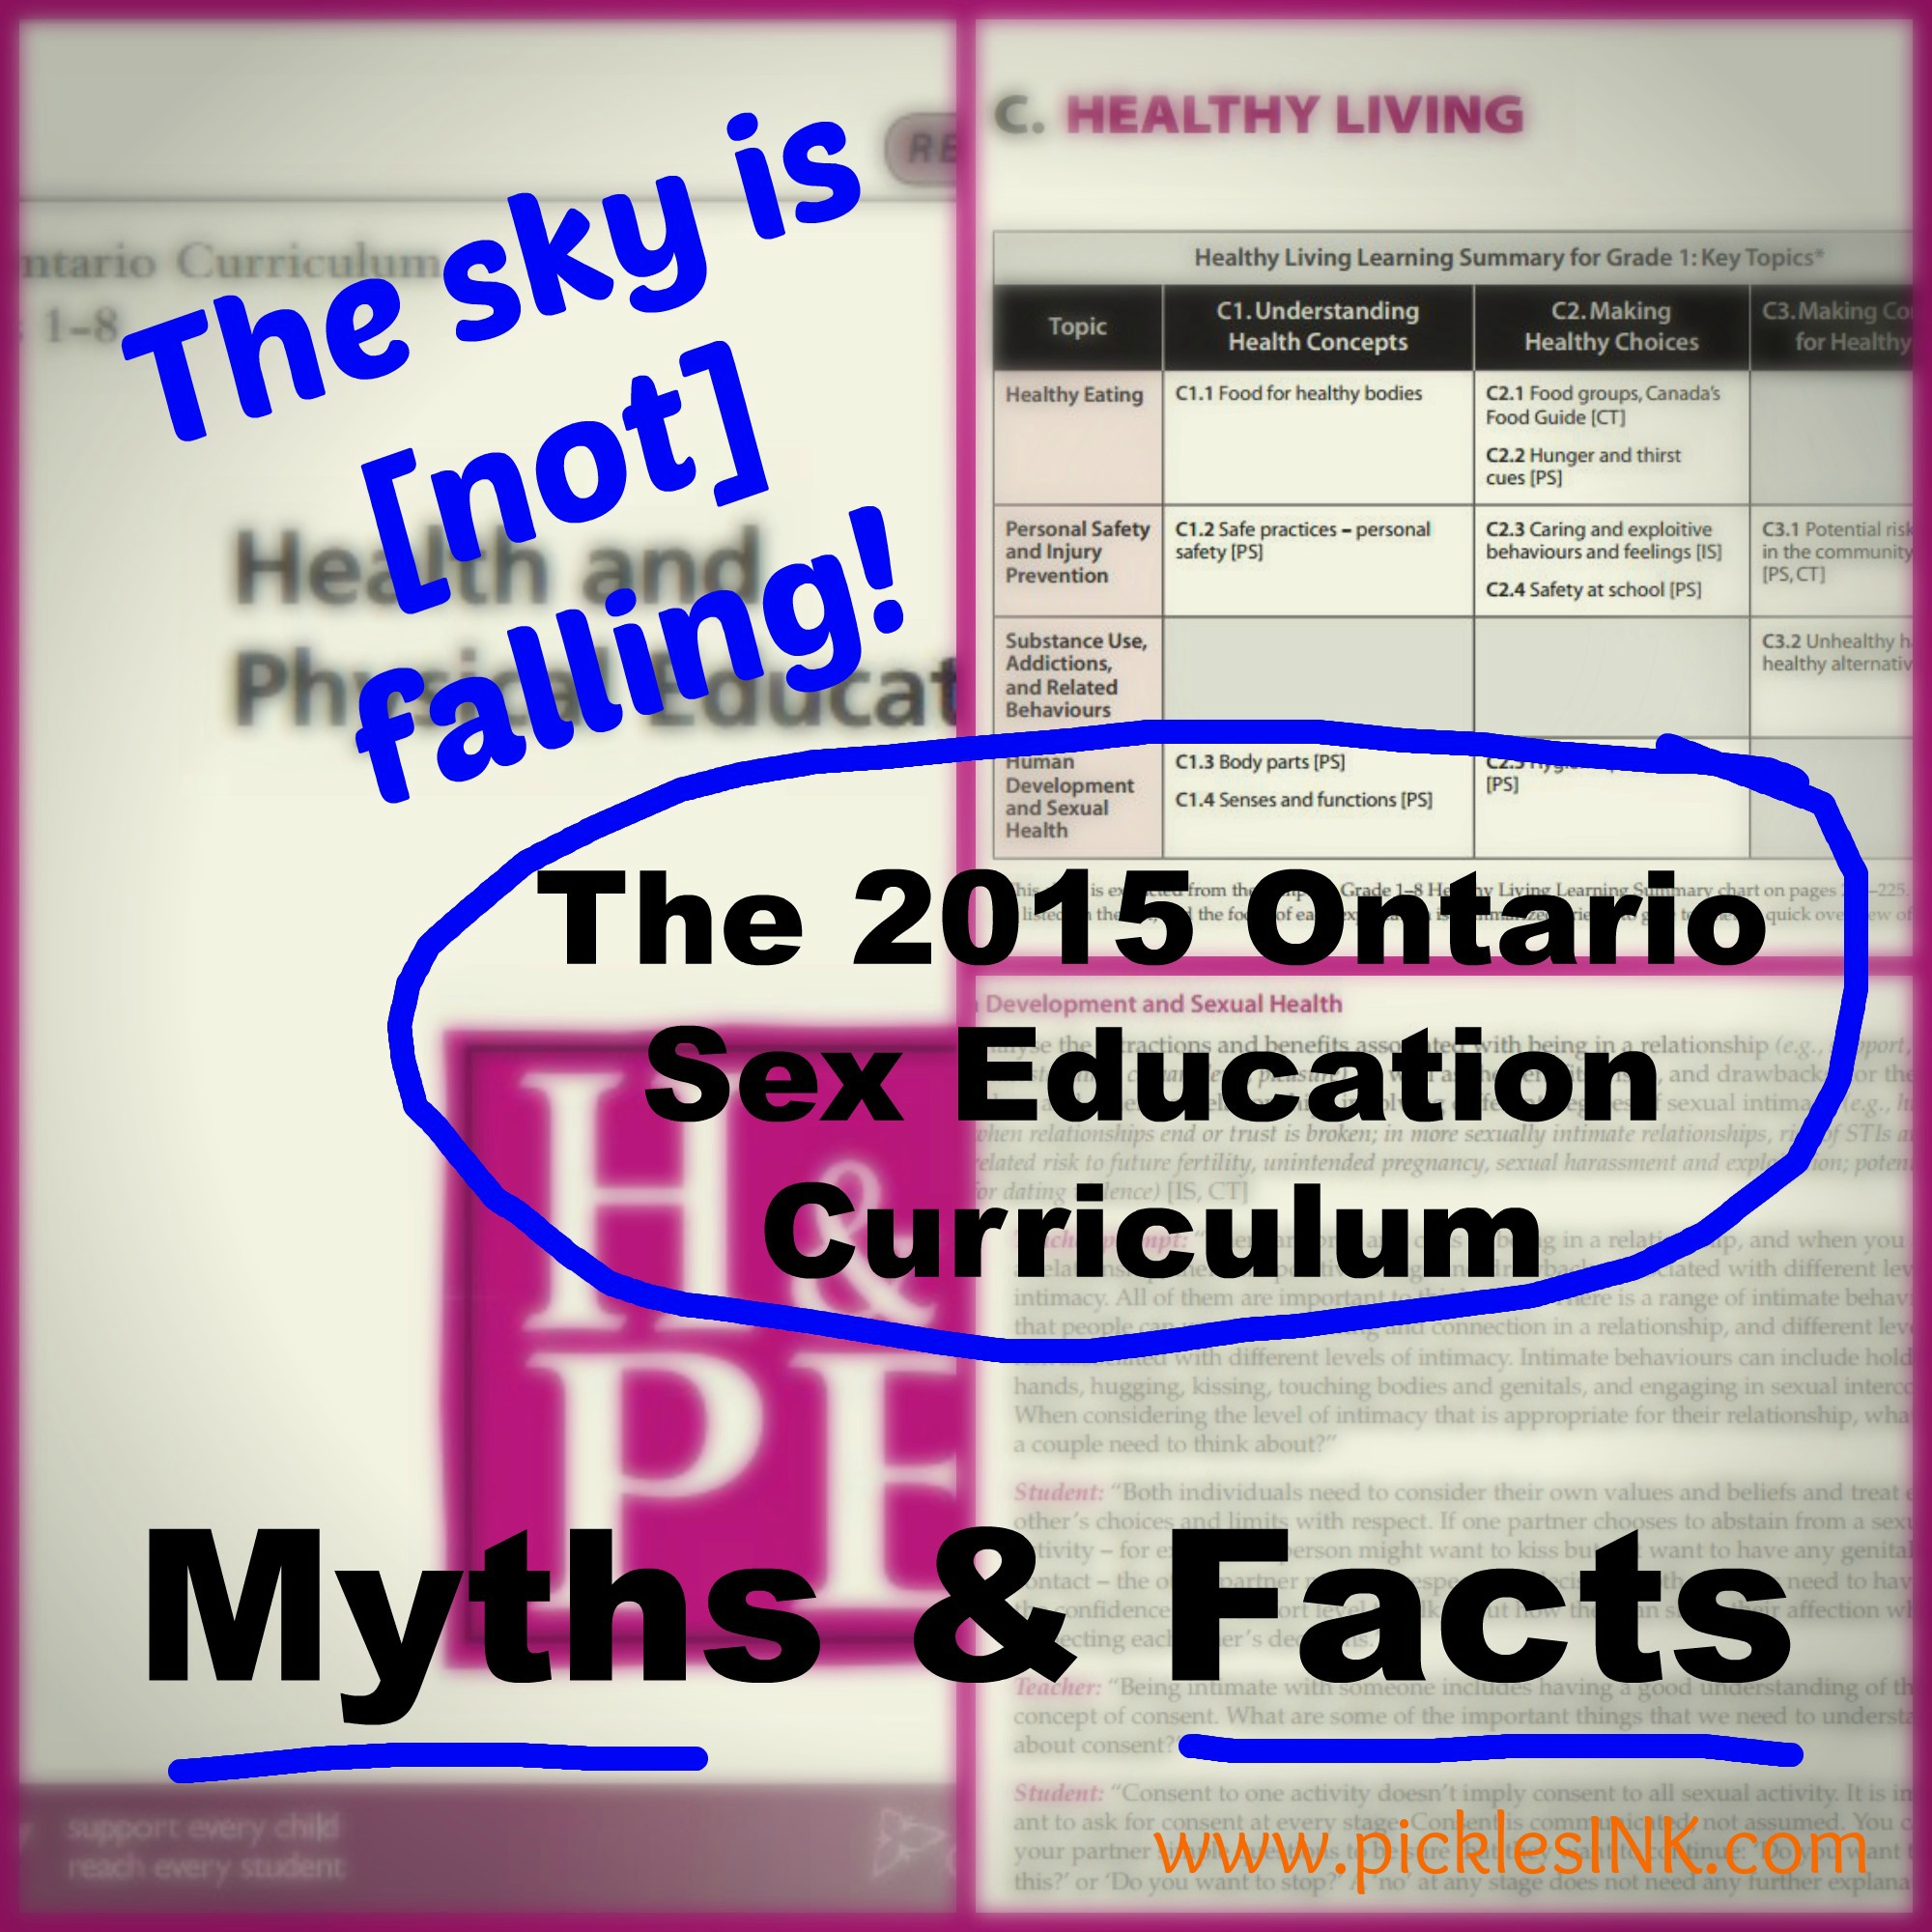 The sky is (not) falling - part 2 - Myths and Facts about the 2015 Ontario Sex Education Curriculum